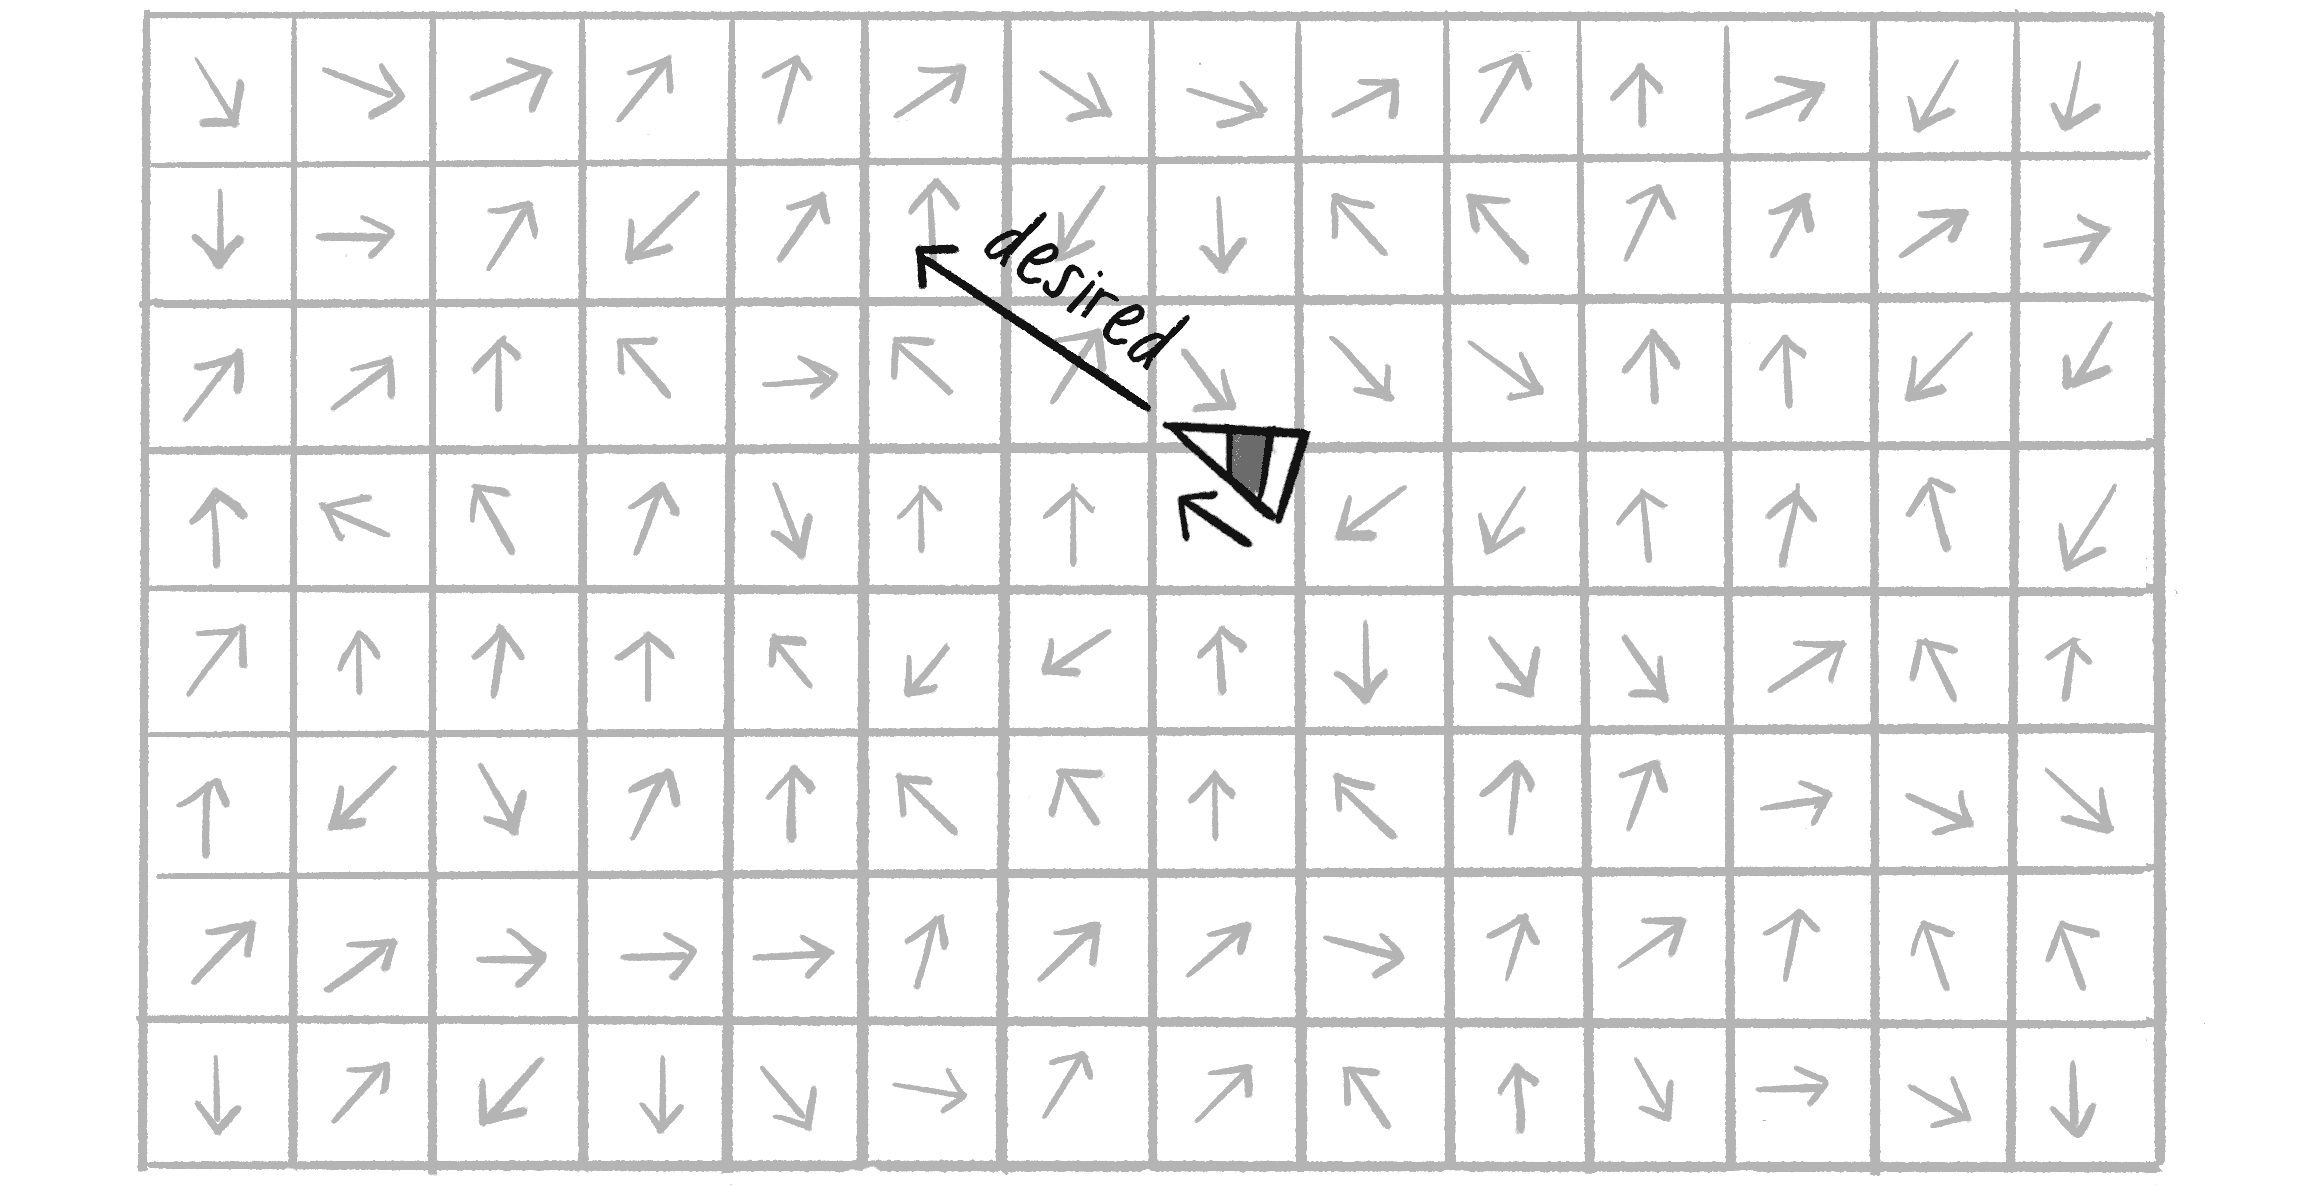 Figure 5.13: A 2D grid full of unit vectors pointing in random directions